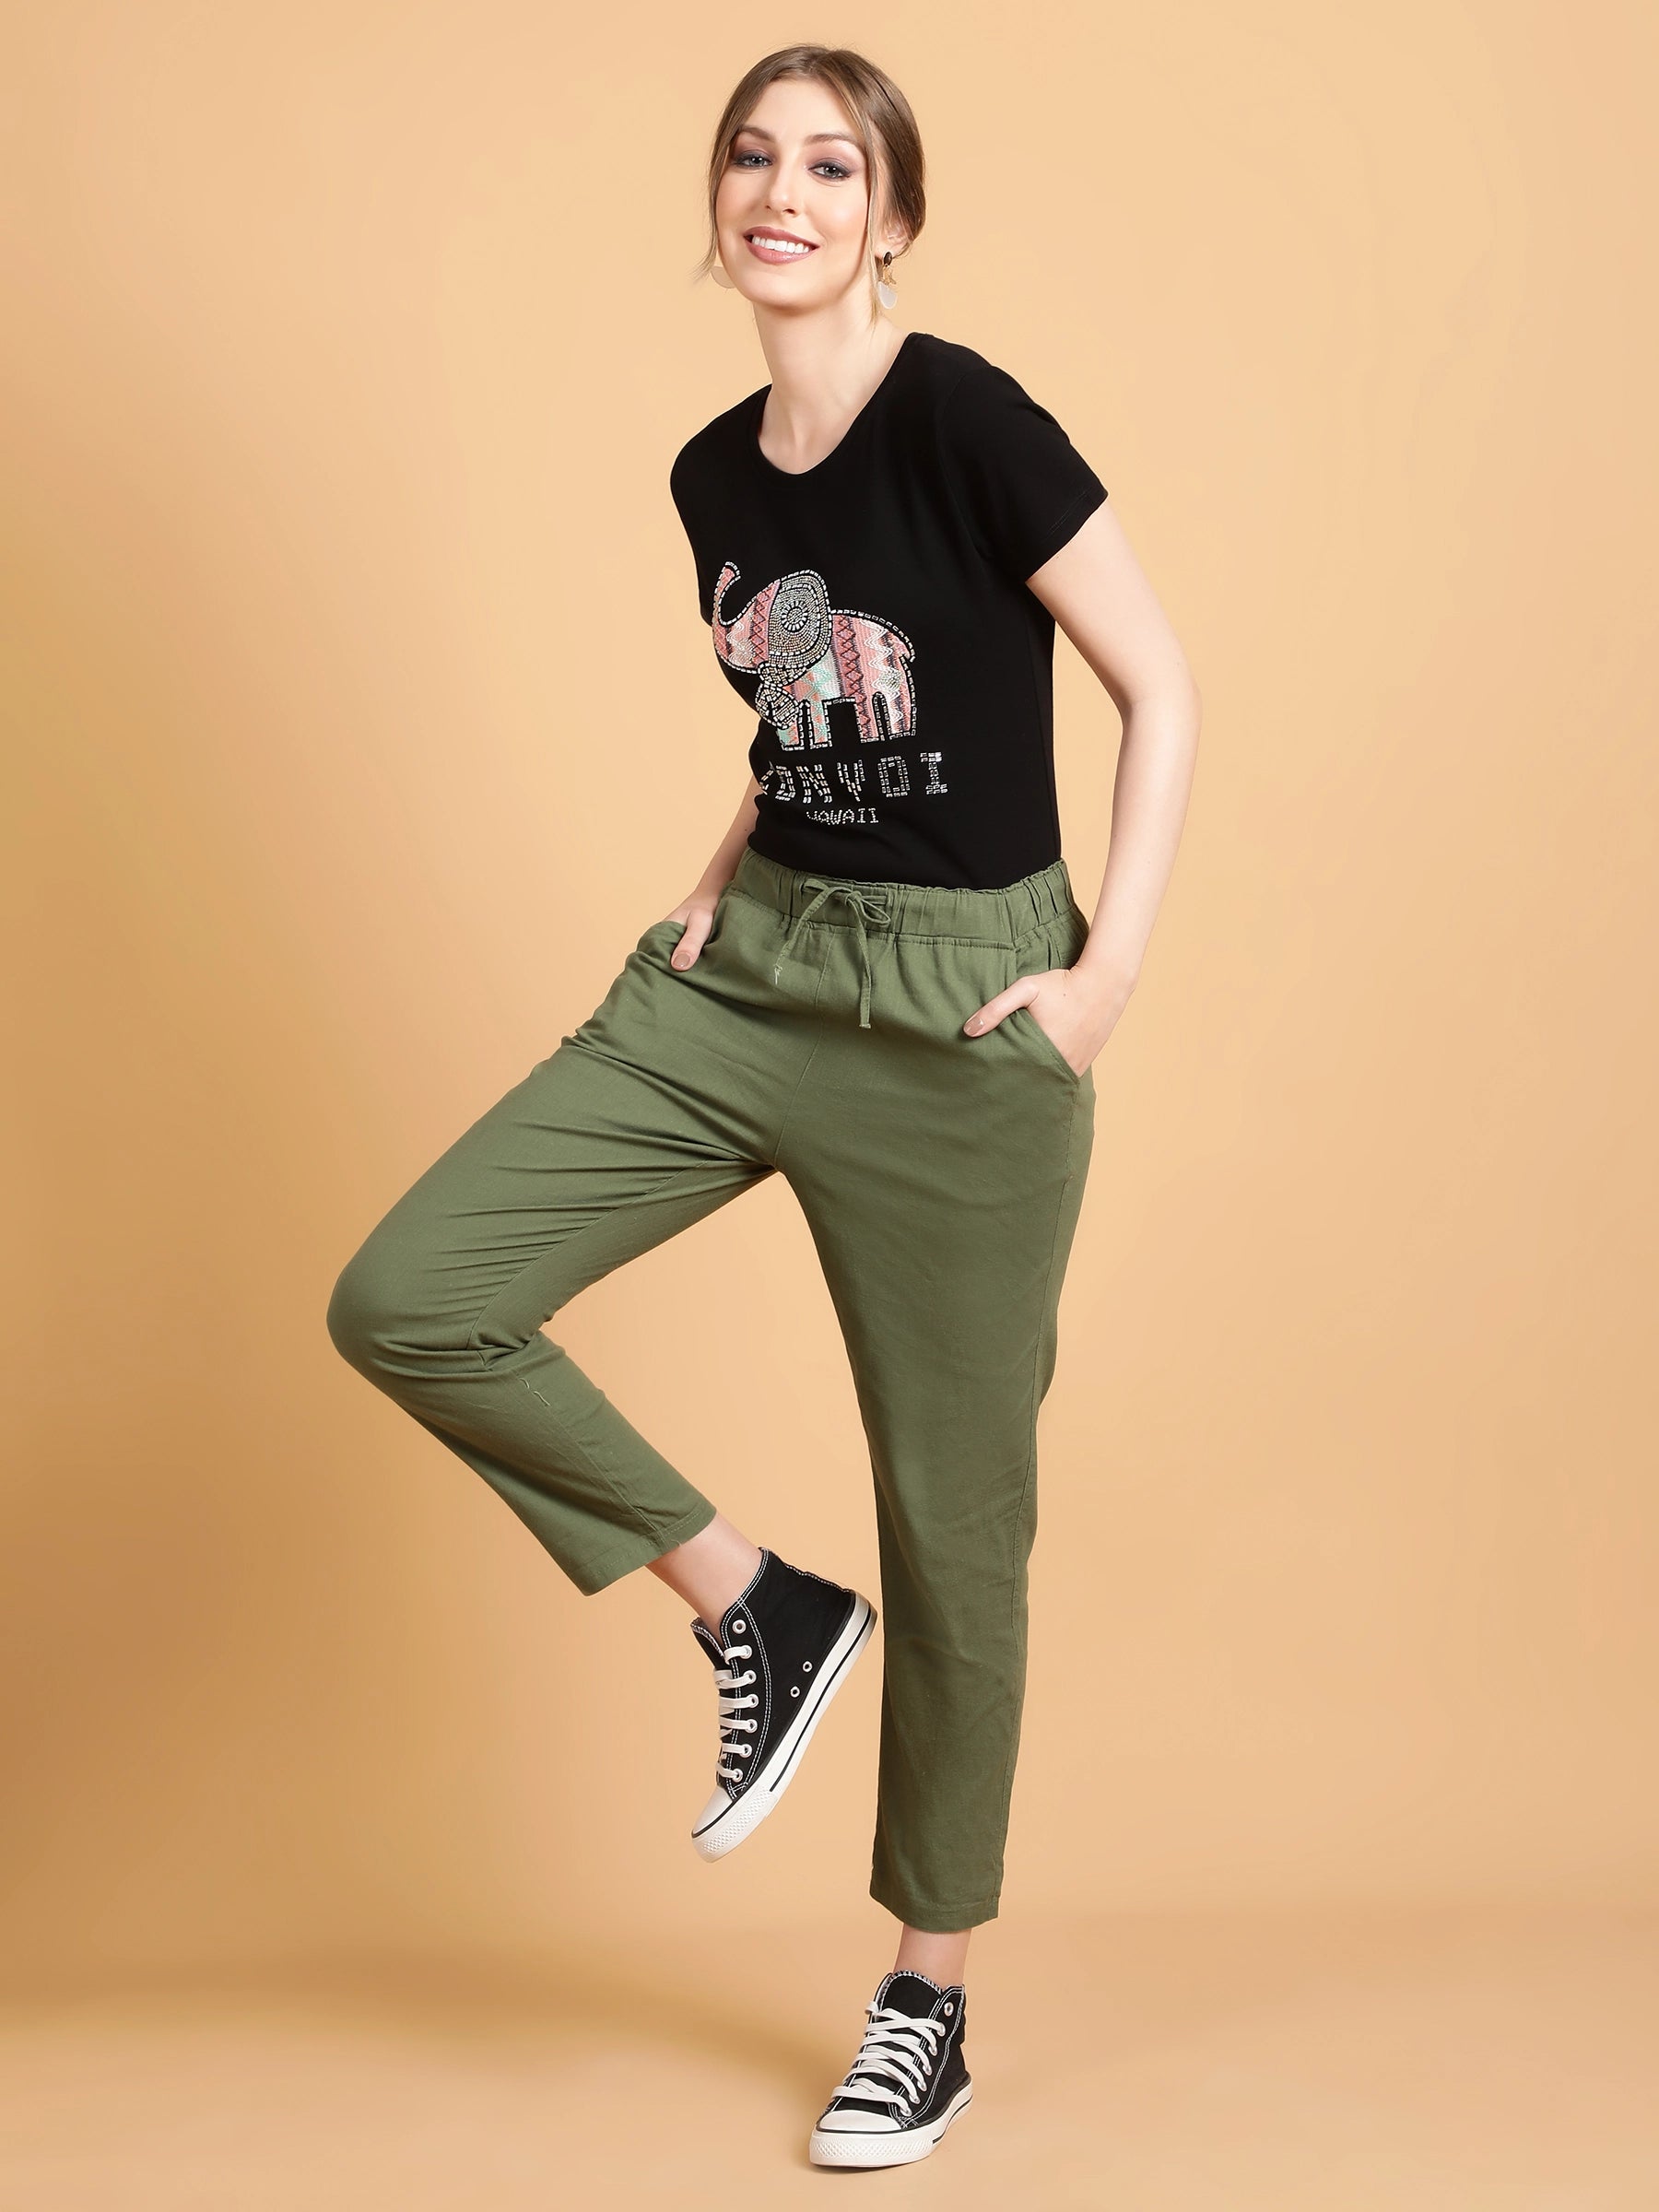 Women Olive Green Narrow-Fit Ankle Length Cotton Lower With Pockets